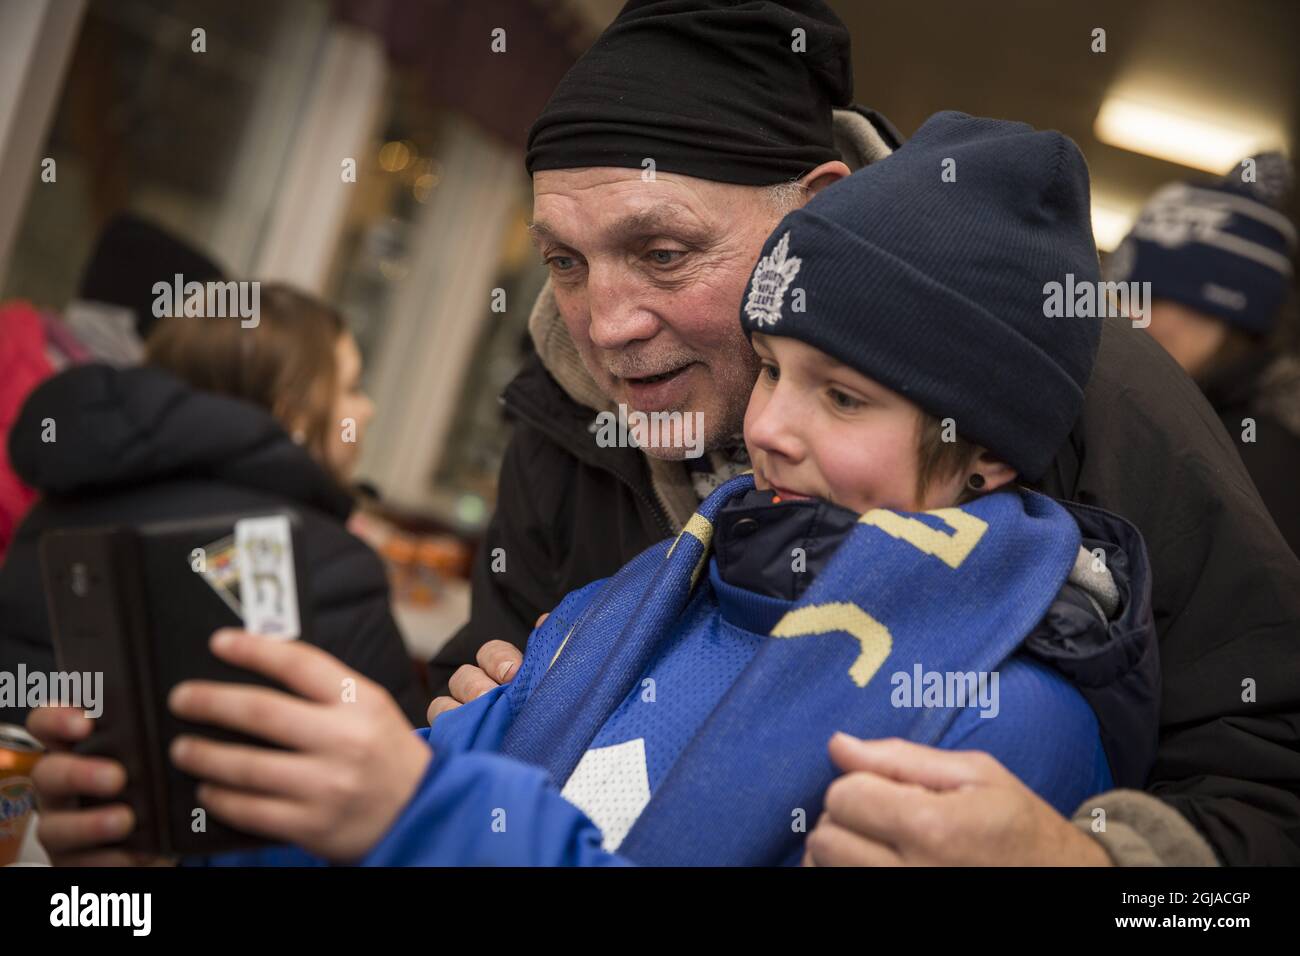 KIRUNA 2016-12-03 Tiger Williams, former Toronto Maple Leafs ice hockey player with a young Toronto Maple Leafs fan during a ceremony for Swedish ice hockey player Borje Salming at Matojarvi ice rink in Kiruna, Sweden December 3, 2016. A banner with Borje Salming's Toronto Maple Leafs number 21 was raised prior to a local hockey match between Kiruna AIF and Malmbergts AIF. Photo Fredric Alm / TT kod 200  Stock Photo